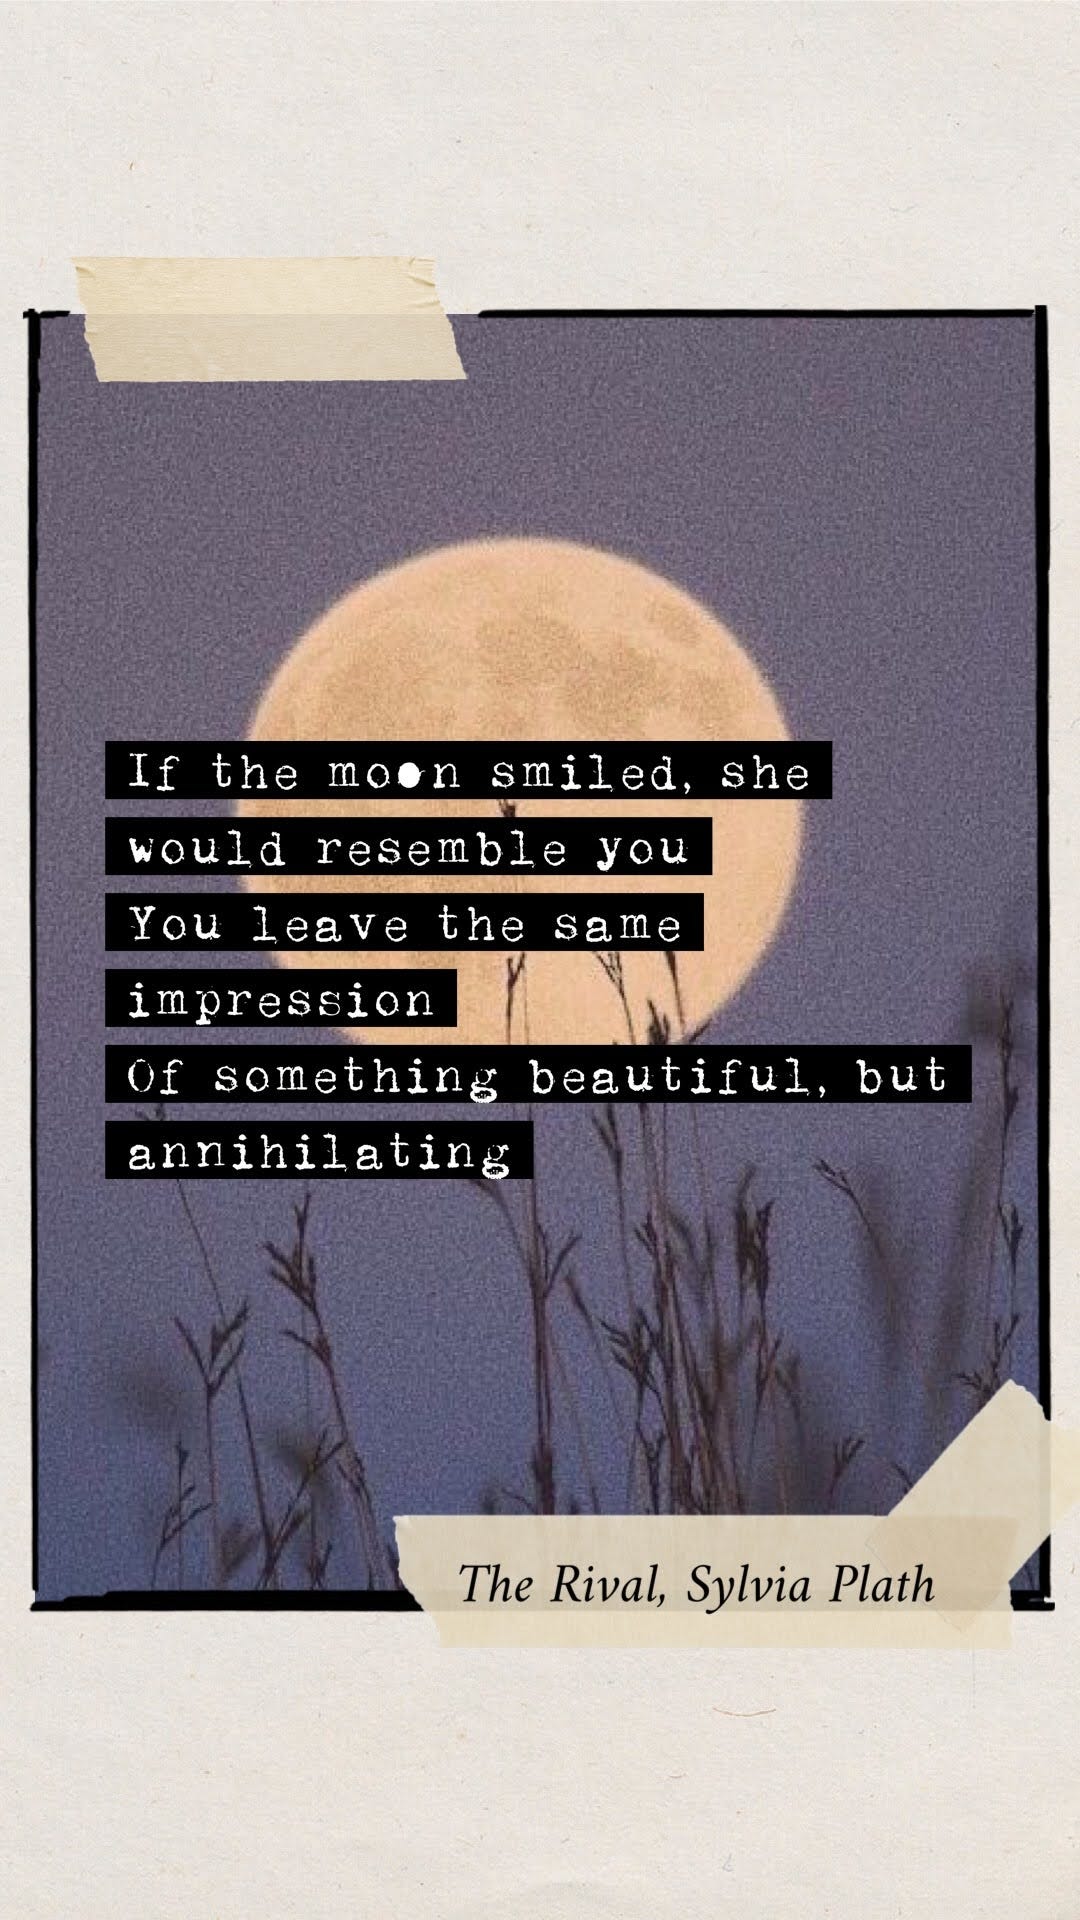 Excerpt from Sylvia Plath's poem, The Rival. It reads: If the moon smiled, she would resemble you. You leave the same impression, Of something beautiful but annihilating.